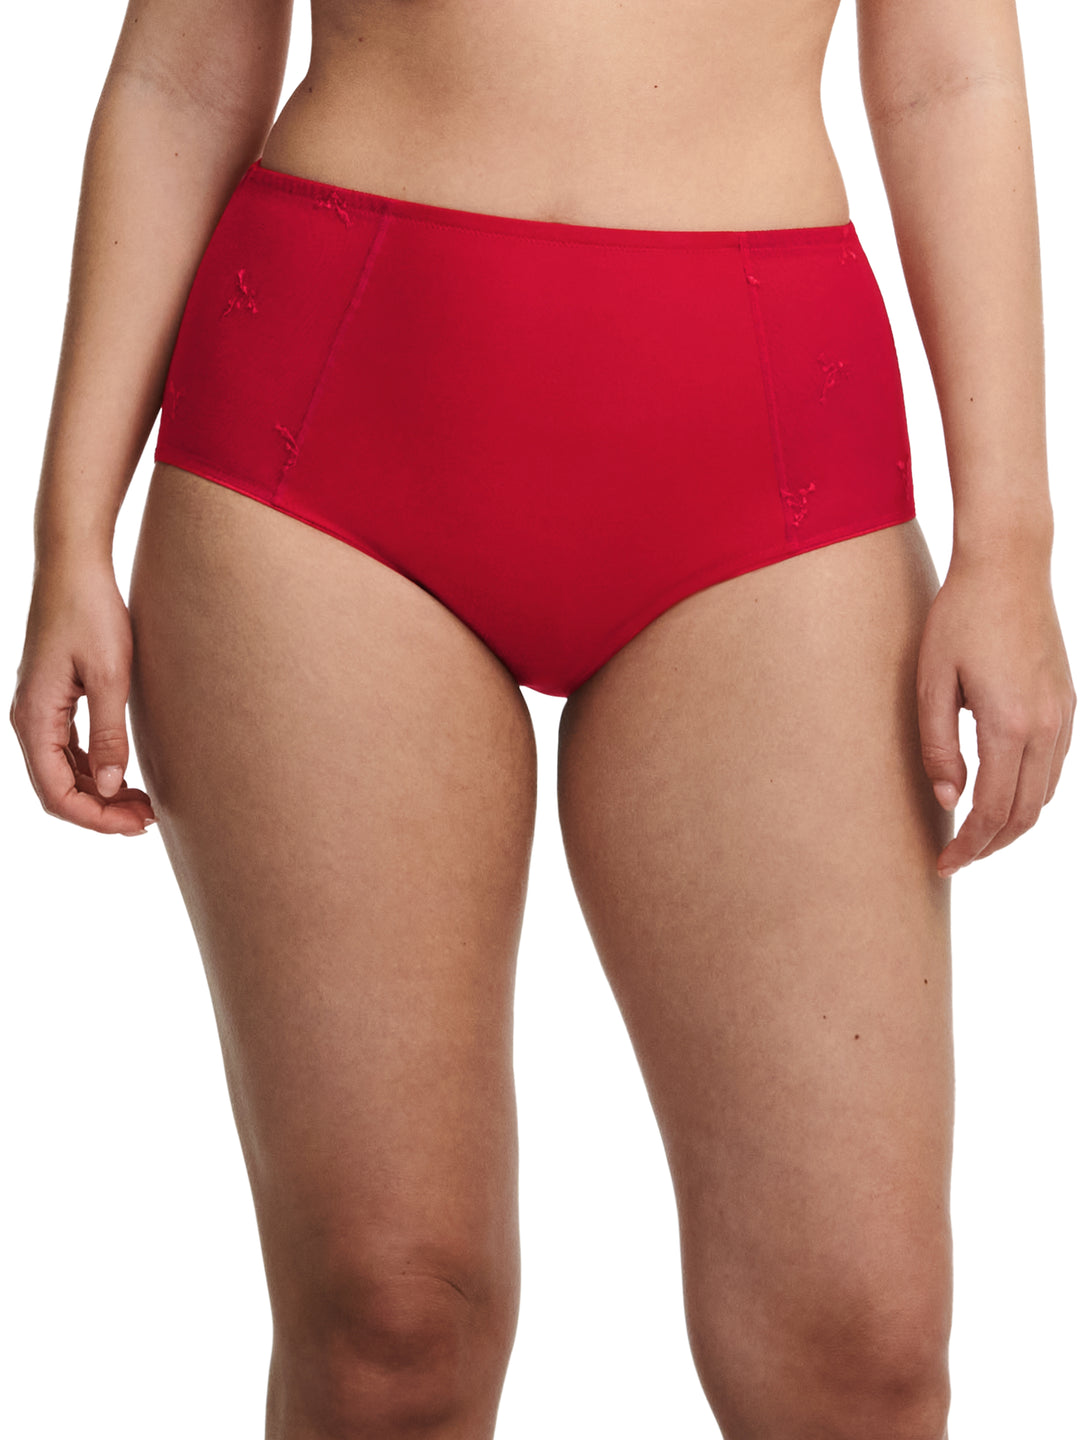 Chantelle - Every Curve High-Waisted Support Full Brief Scarlet / Peach